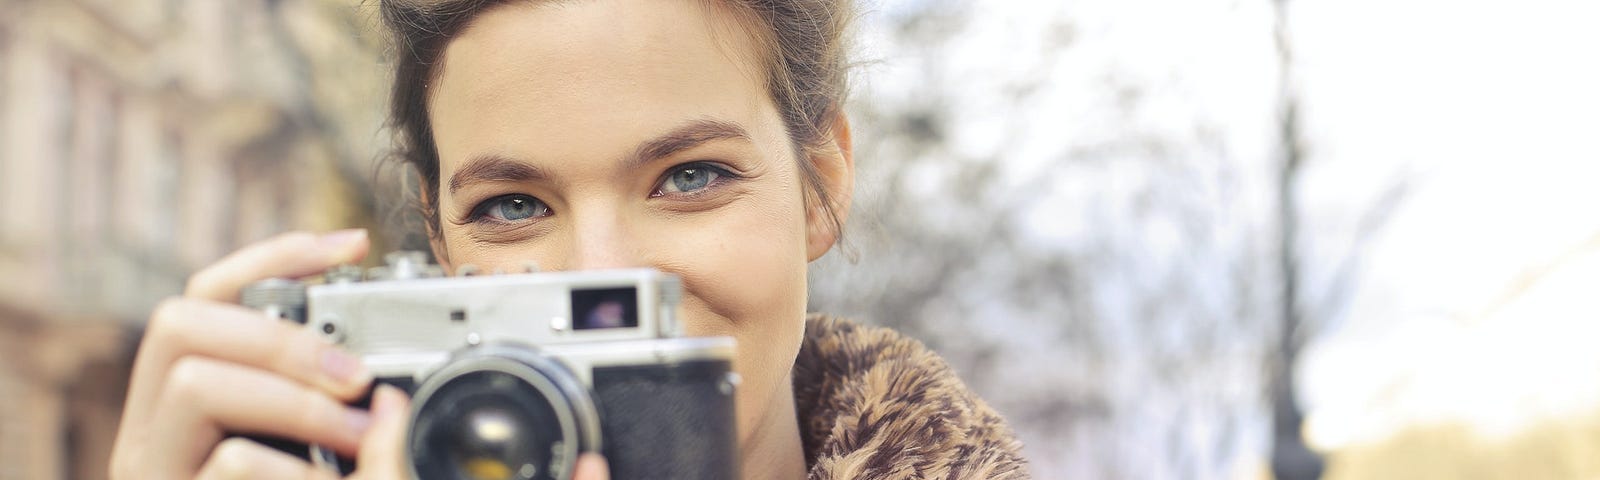 Woman holding black and gray focus camera